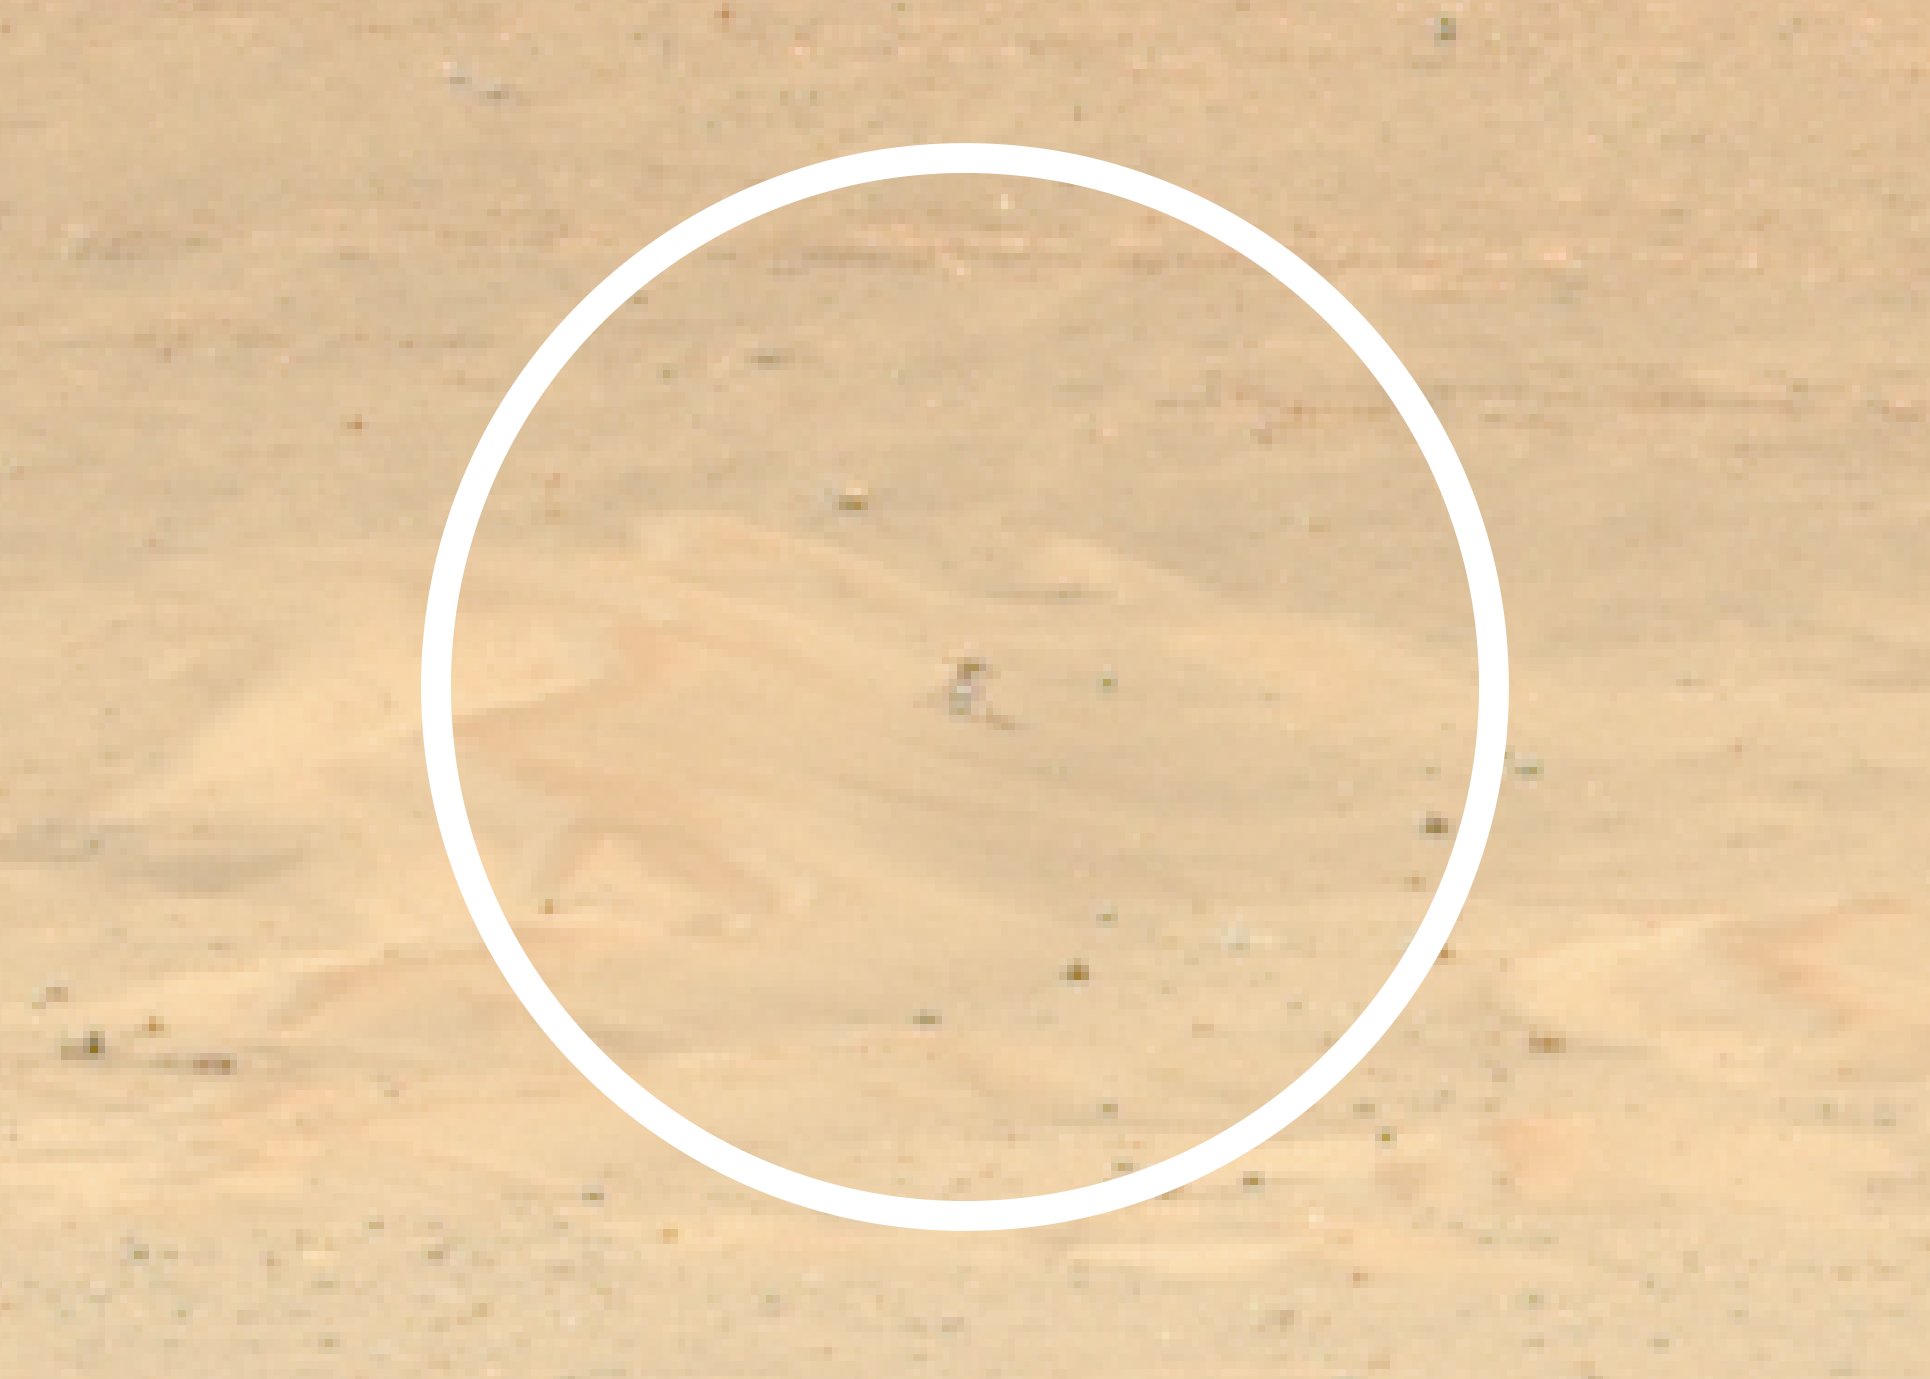 Magnified view of a photo from NASA's Ingenuity Mars helicopter taken by the agency's Perseverance rover.  The rover team posted this image on Twitter on January 1.  11, 2023.